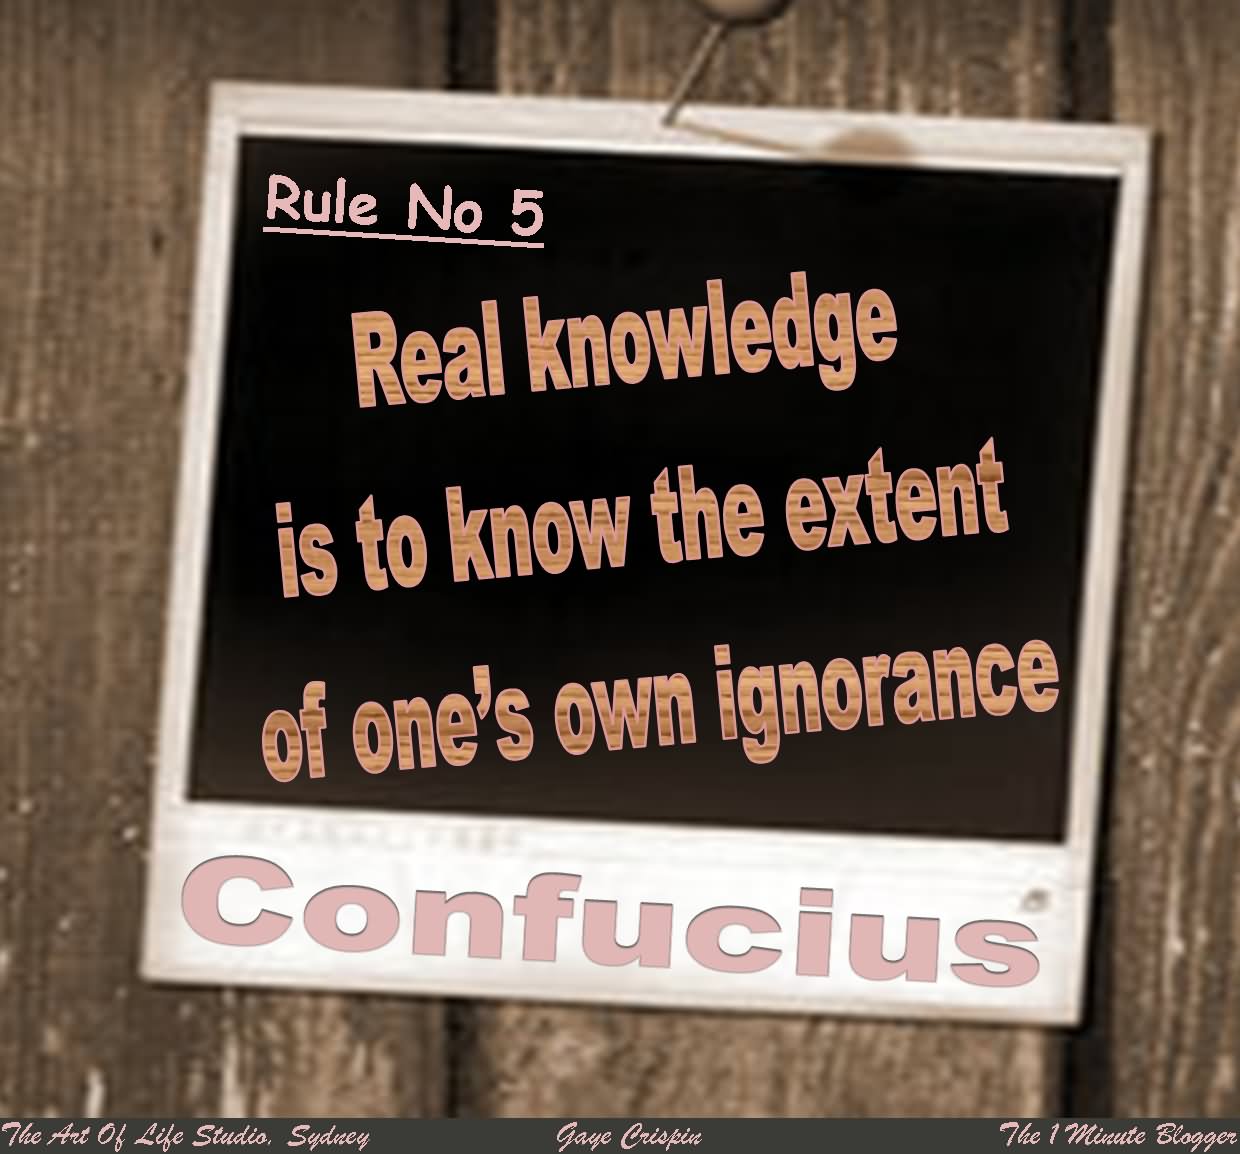 Real knowledge is to know the extent of one’s own ignorance.